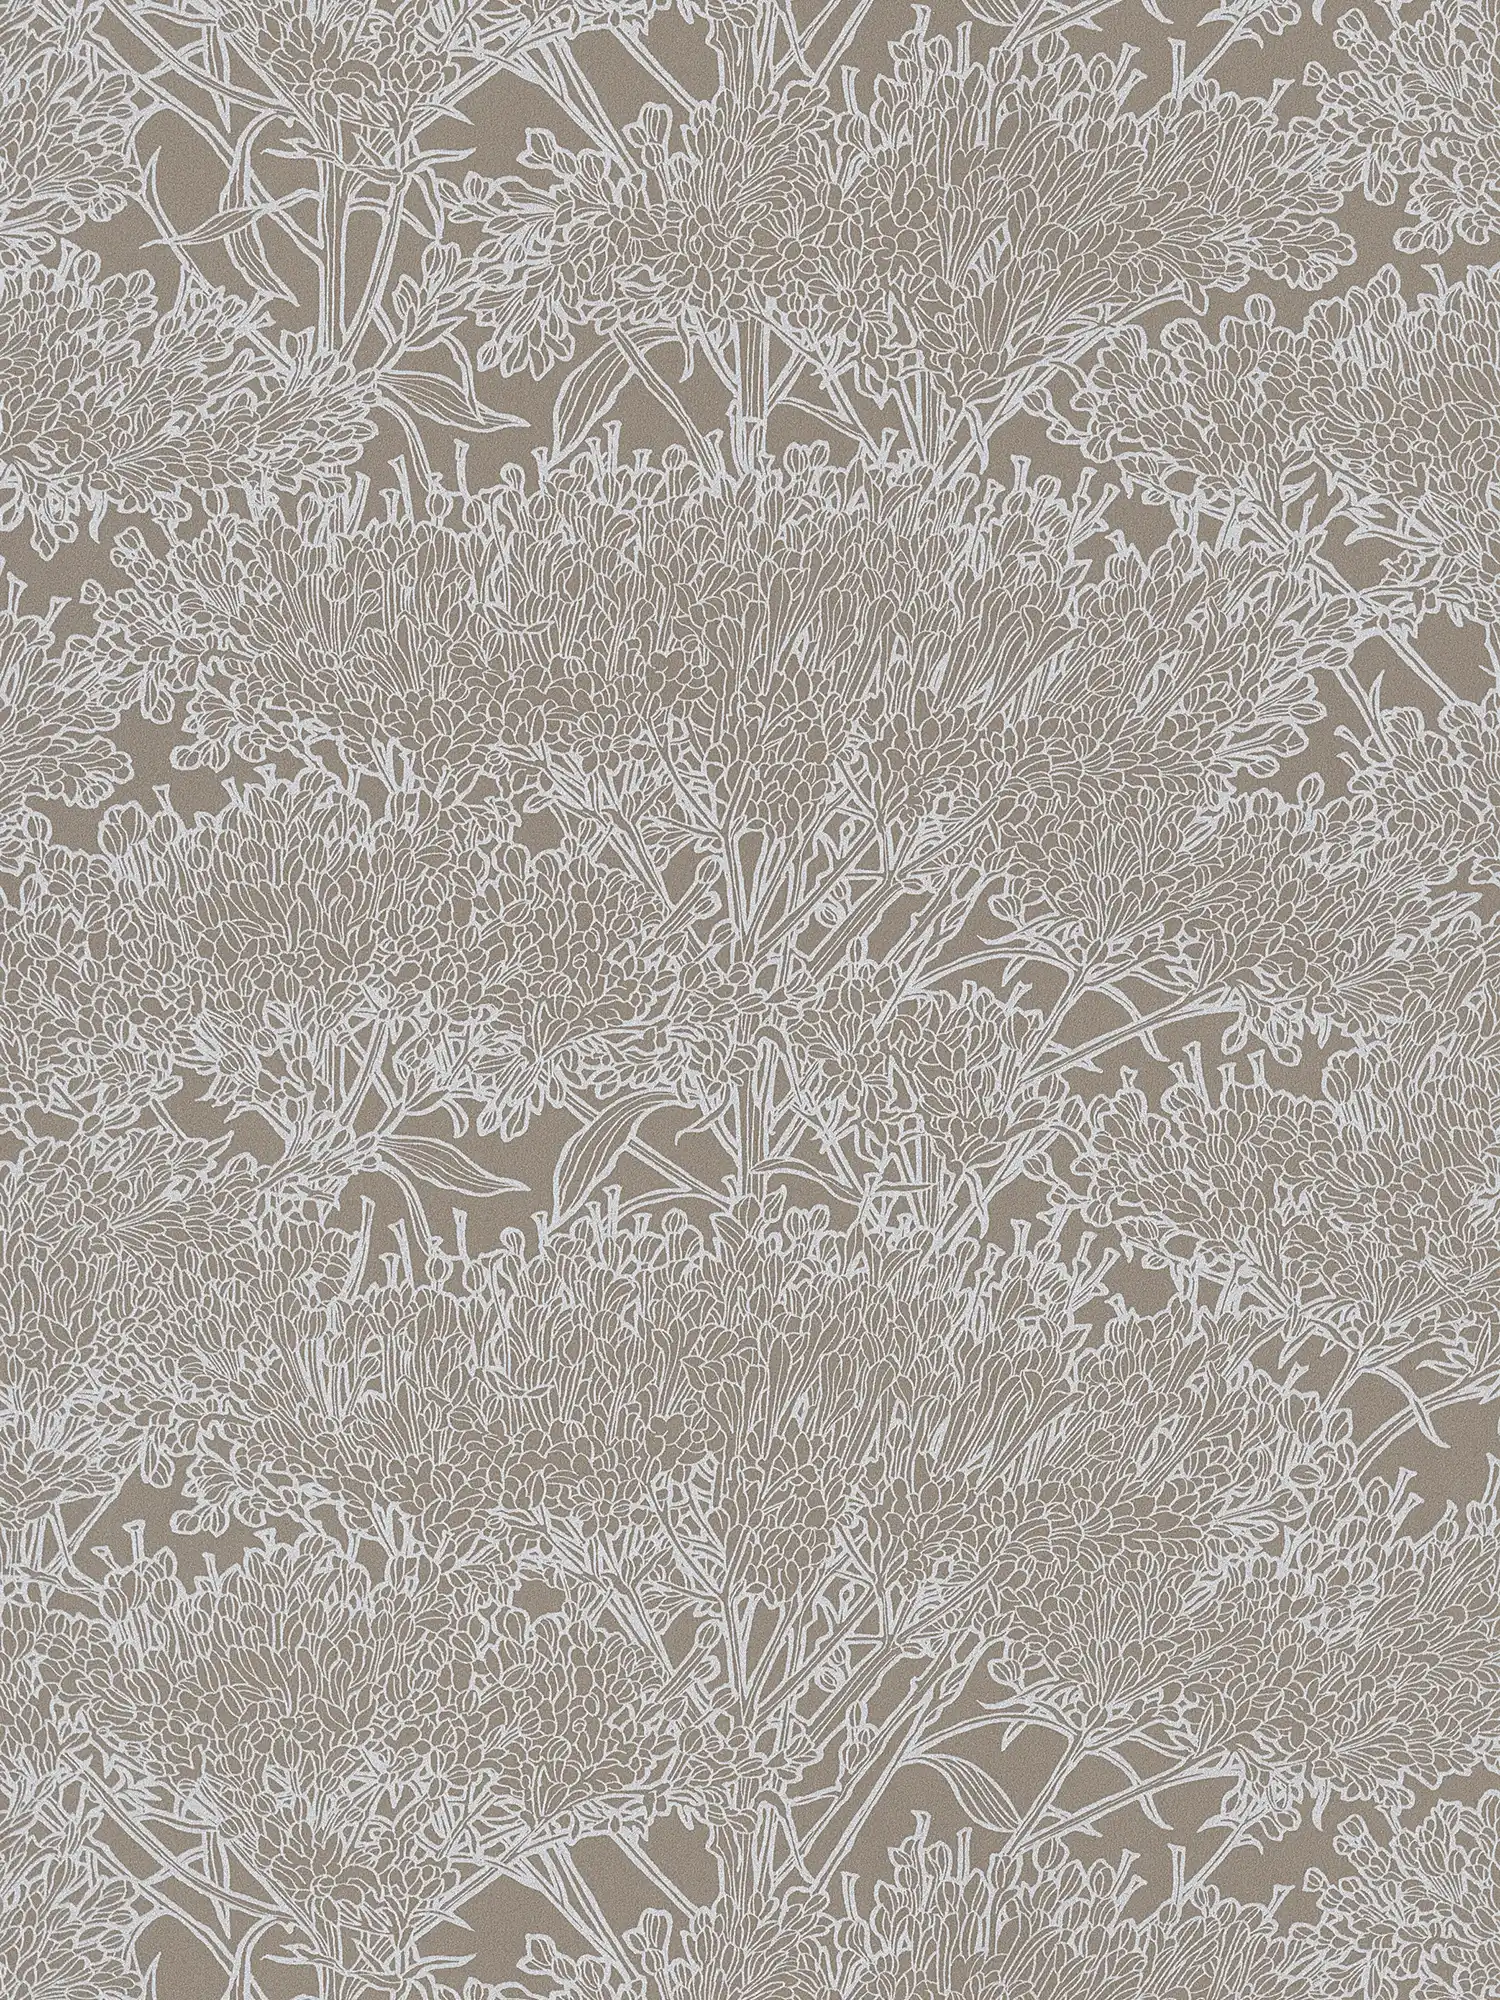 Floral wallpaper in grey with silver metallic effect - grey, silver
